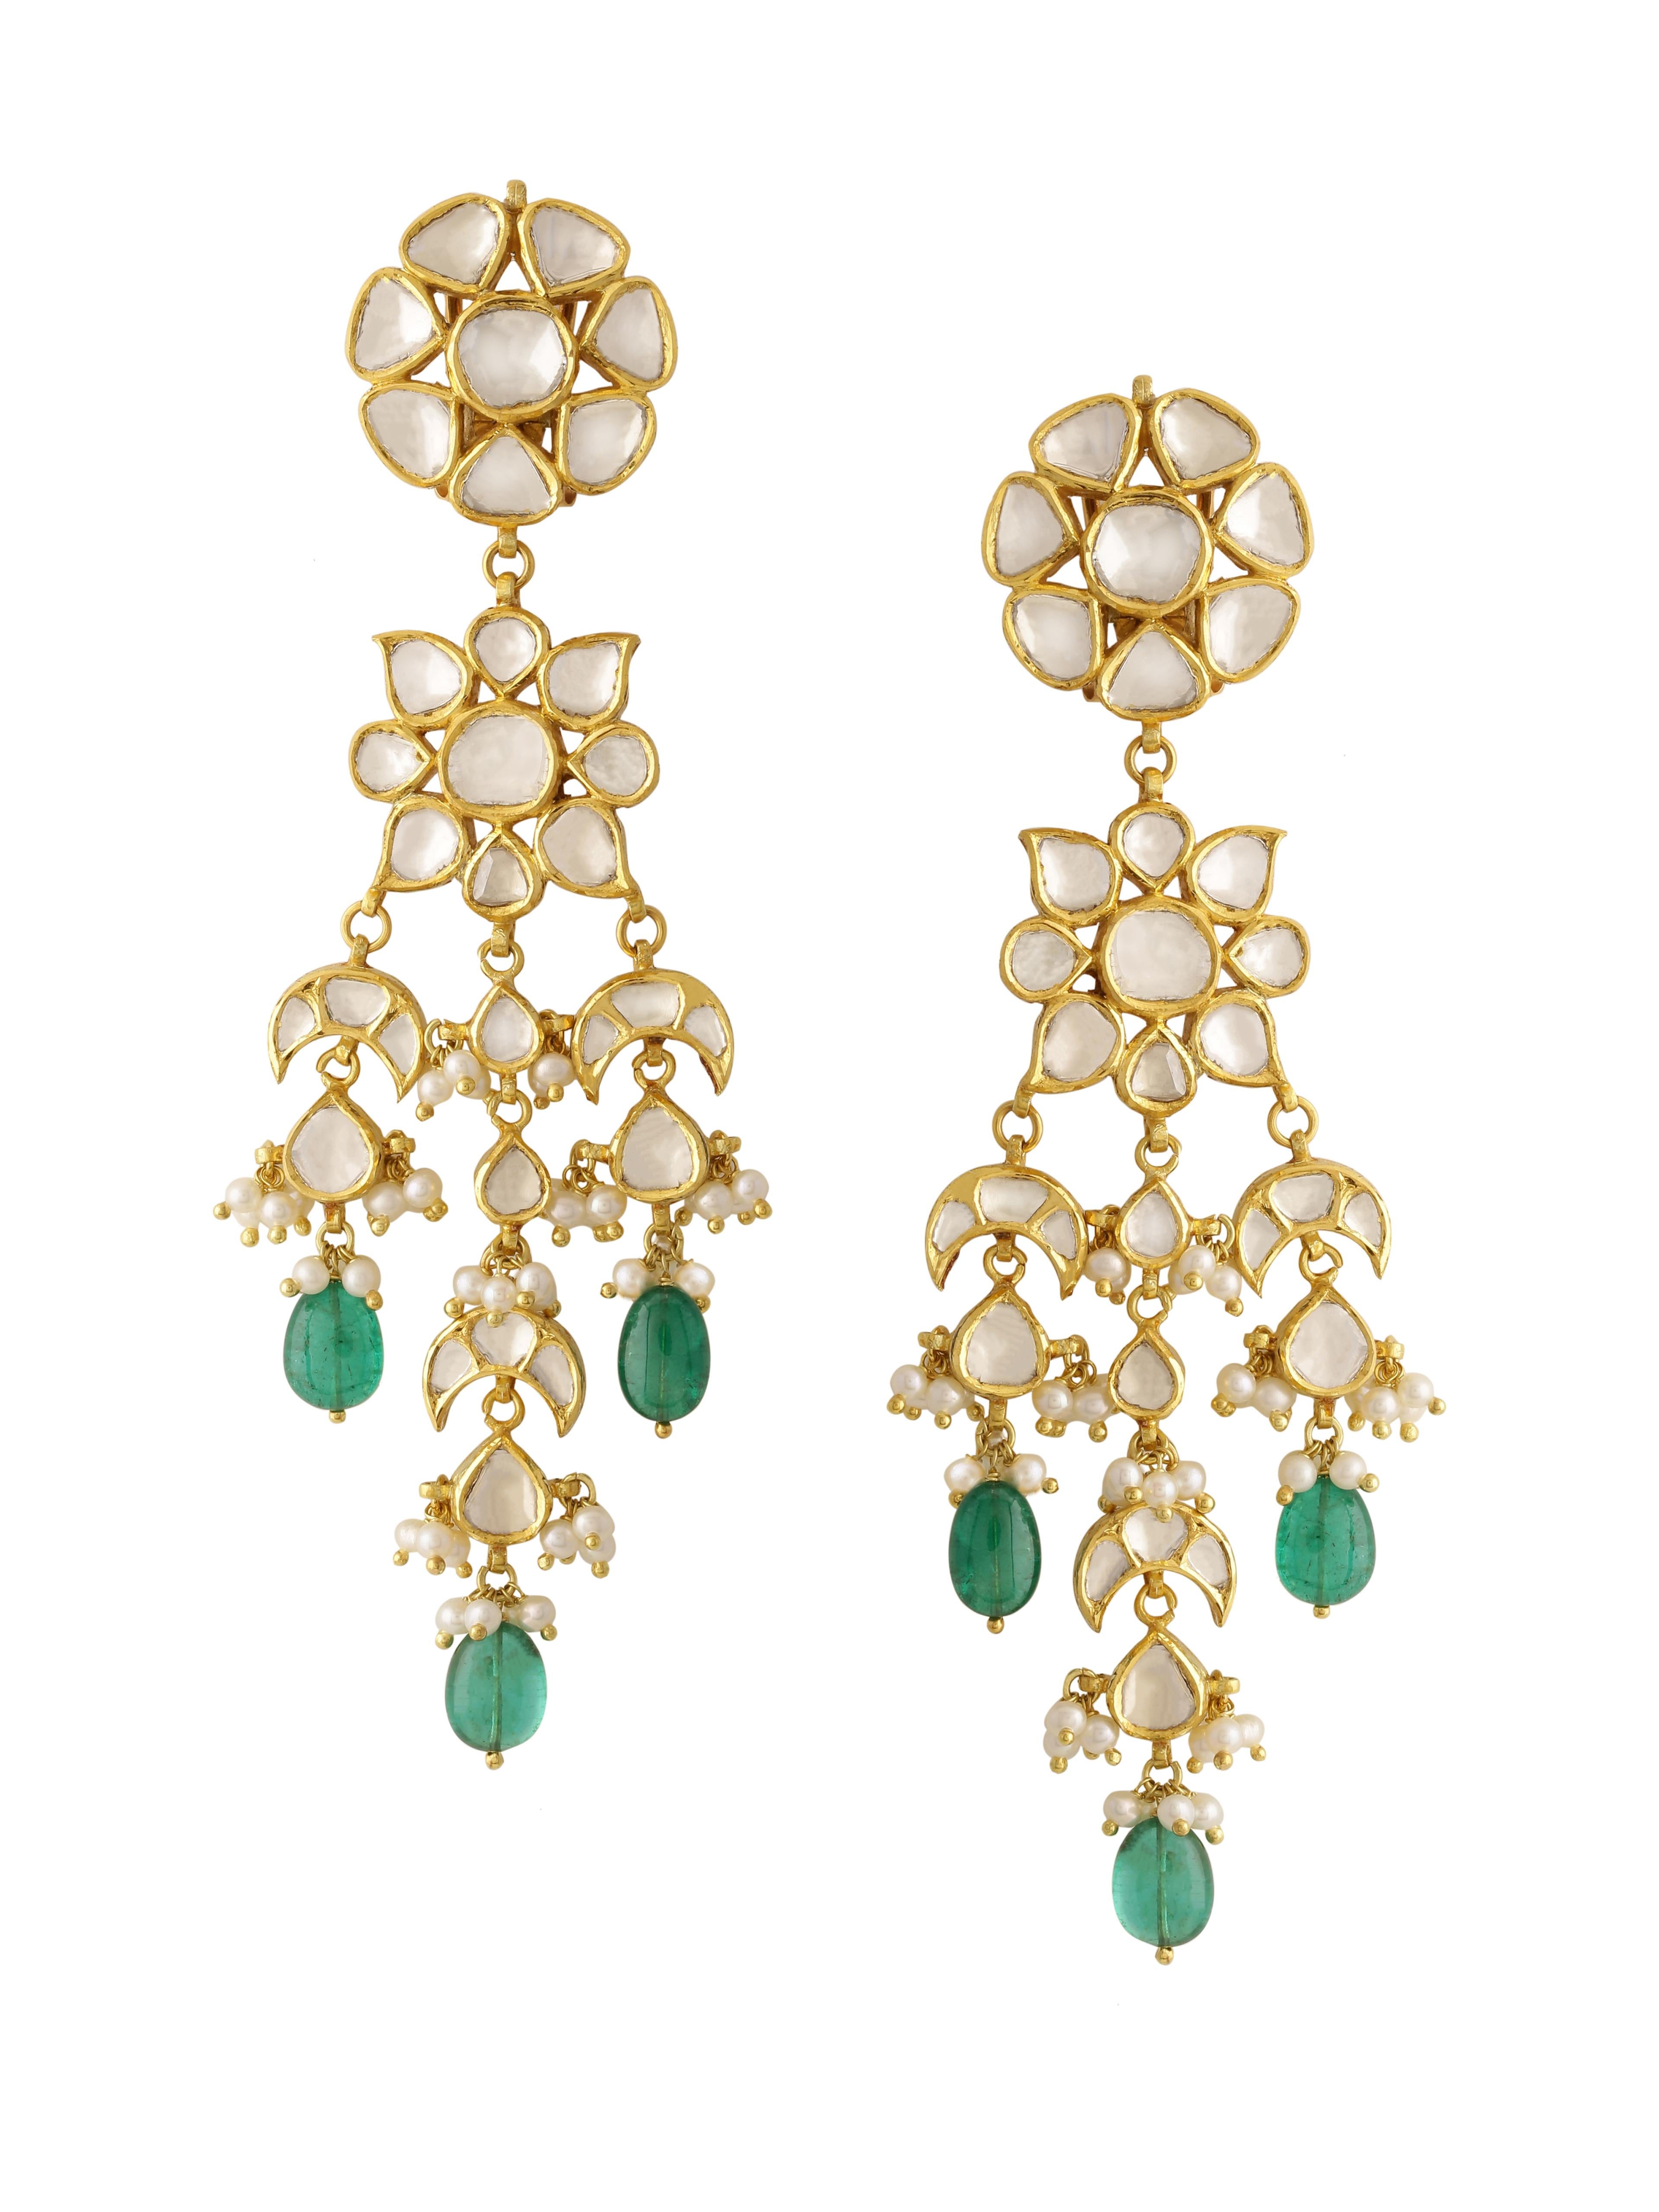 Art Deco Diamonds and Emerald Chandelier Earring Handcrafted in 18K Gold with Fine Enamel For Sale